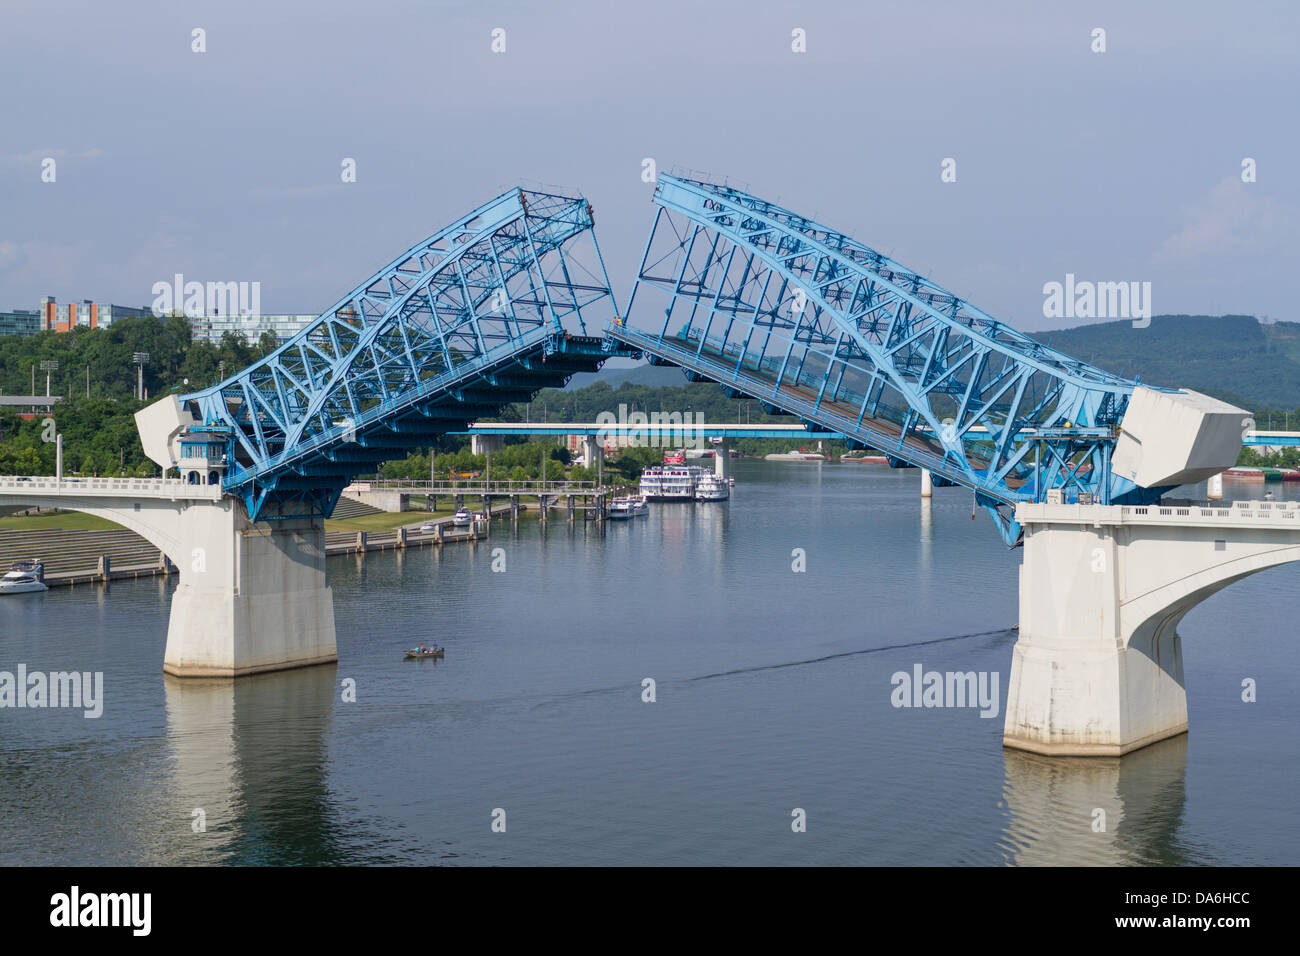 The Market Street drawbridge is up, a small boat passes underneath on the Tennessee River. Stock Photo